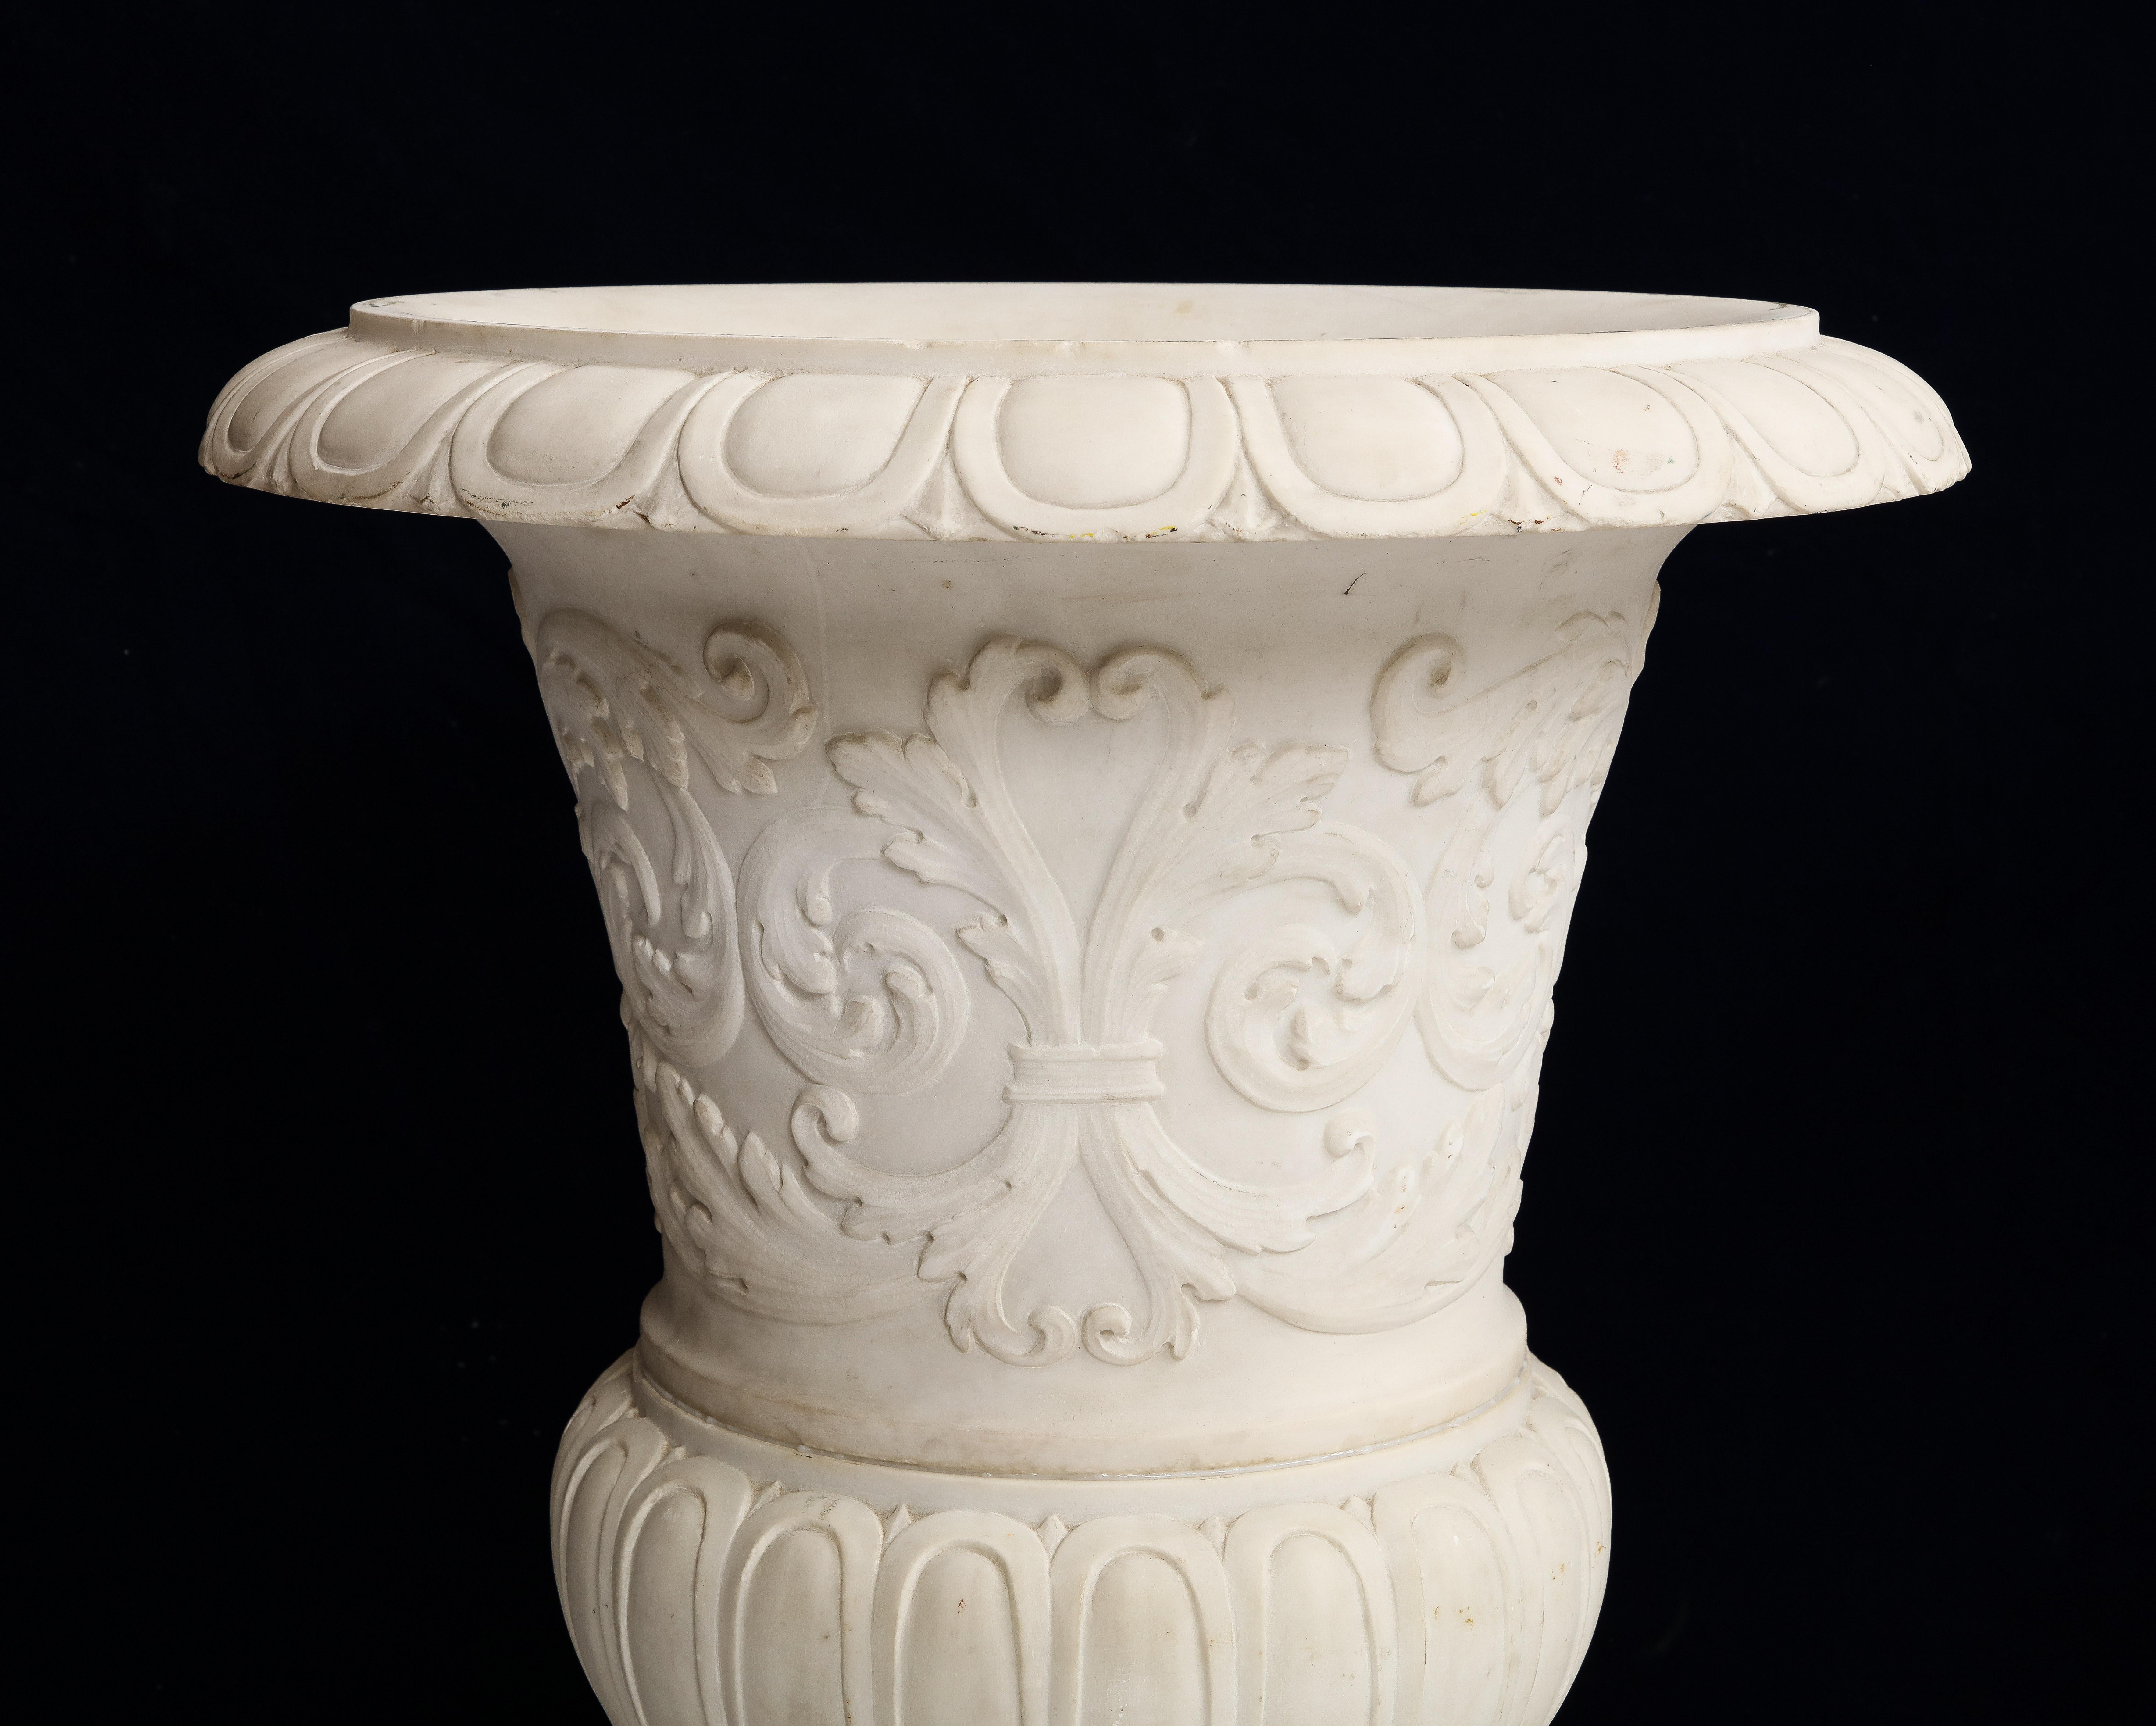 Pair of Italian Carrara Marble Medici Vases w/ Neoclassical Motifs in Relief For Sale 9